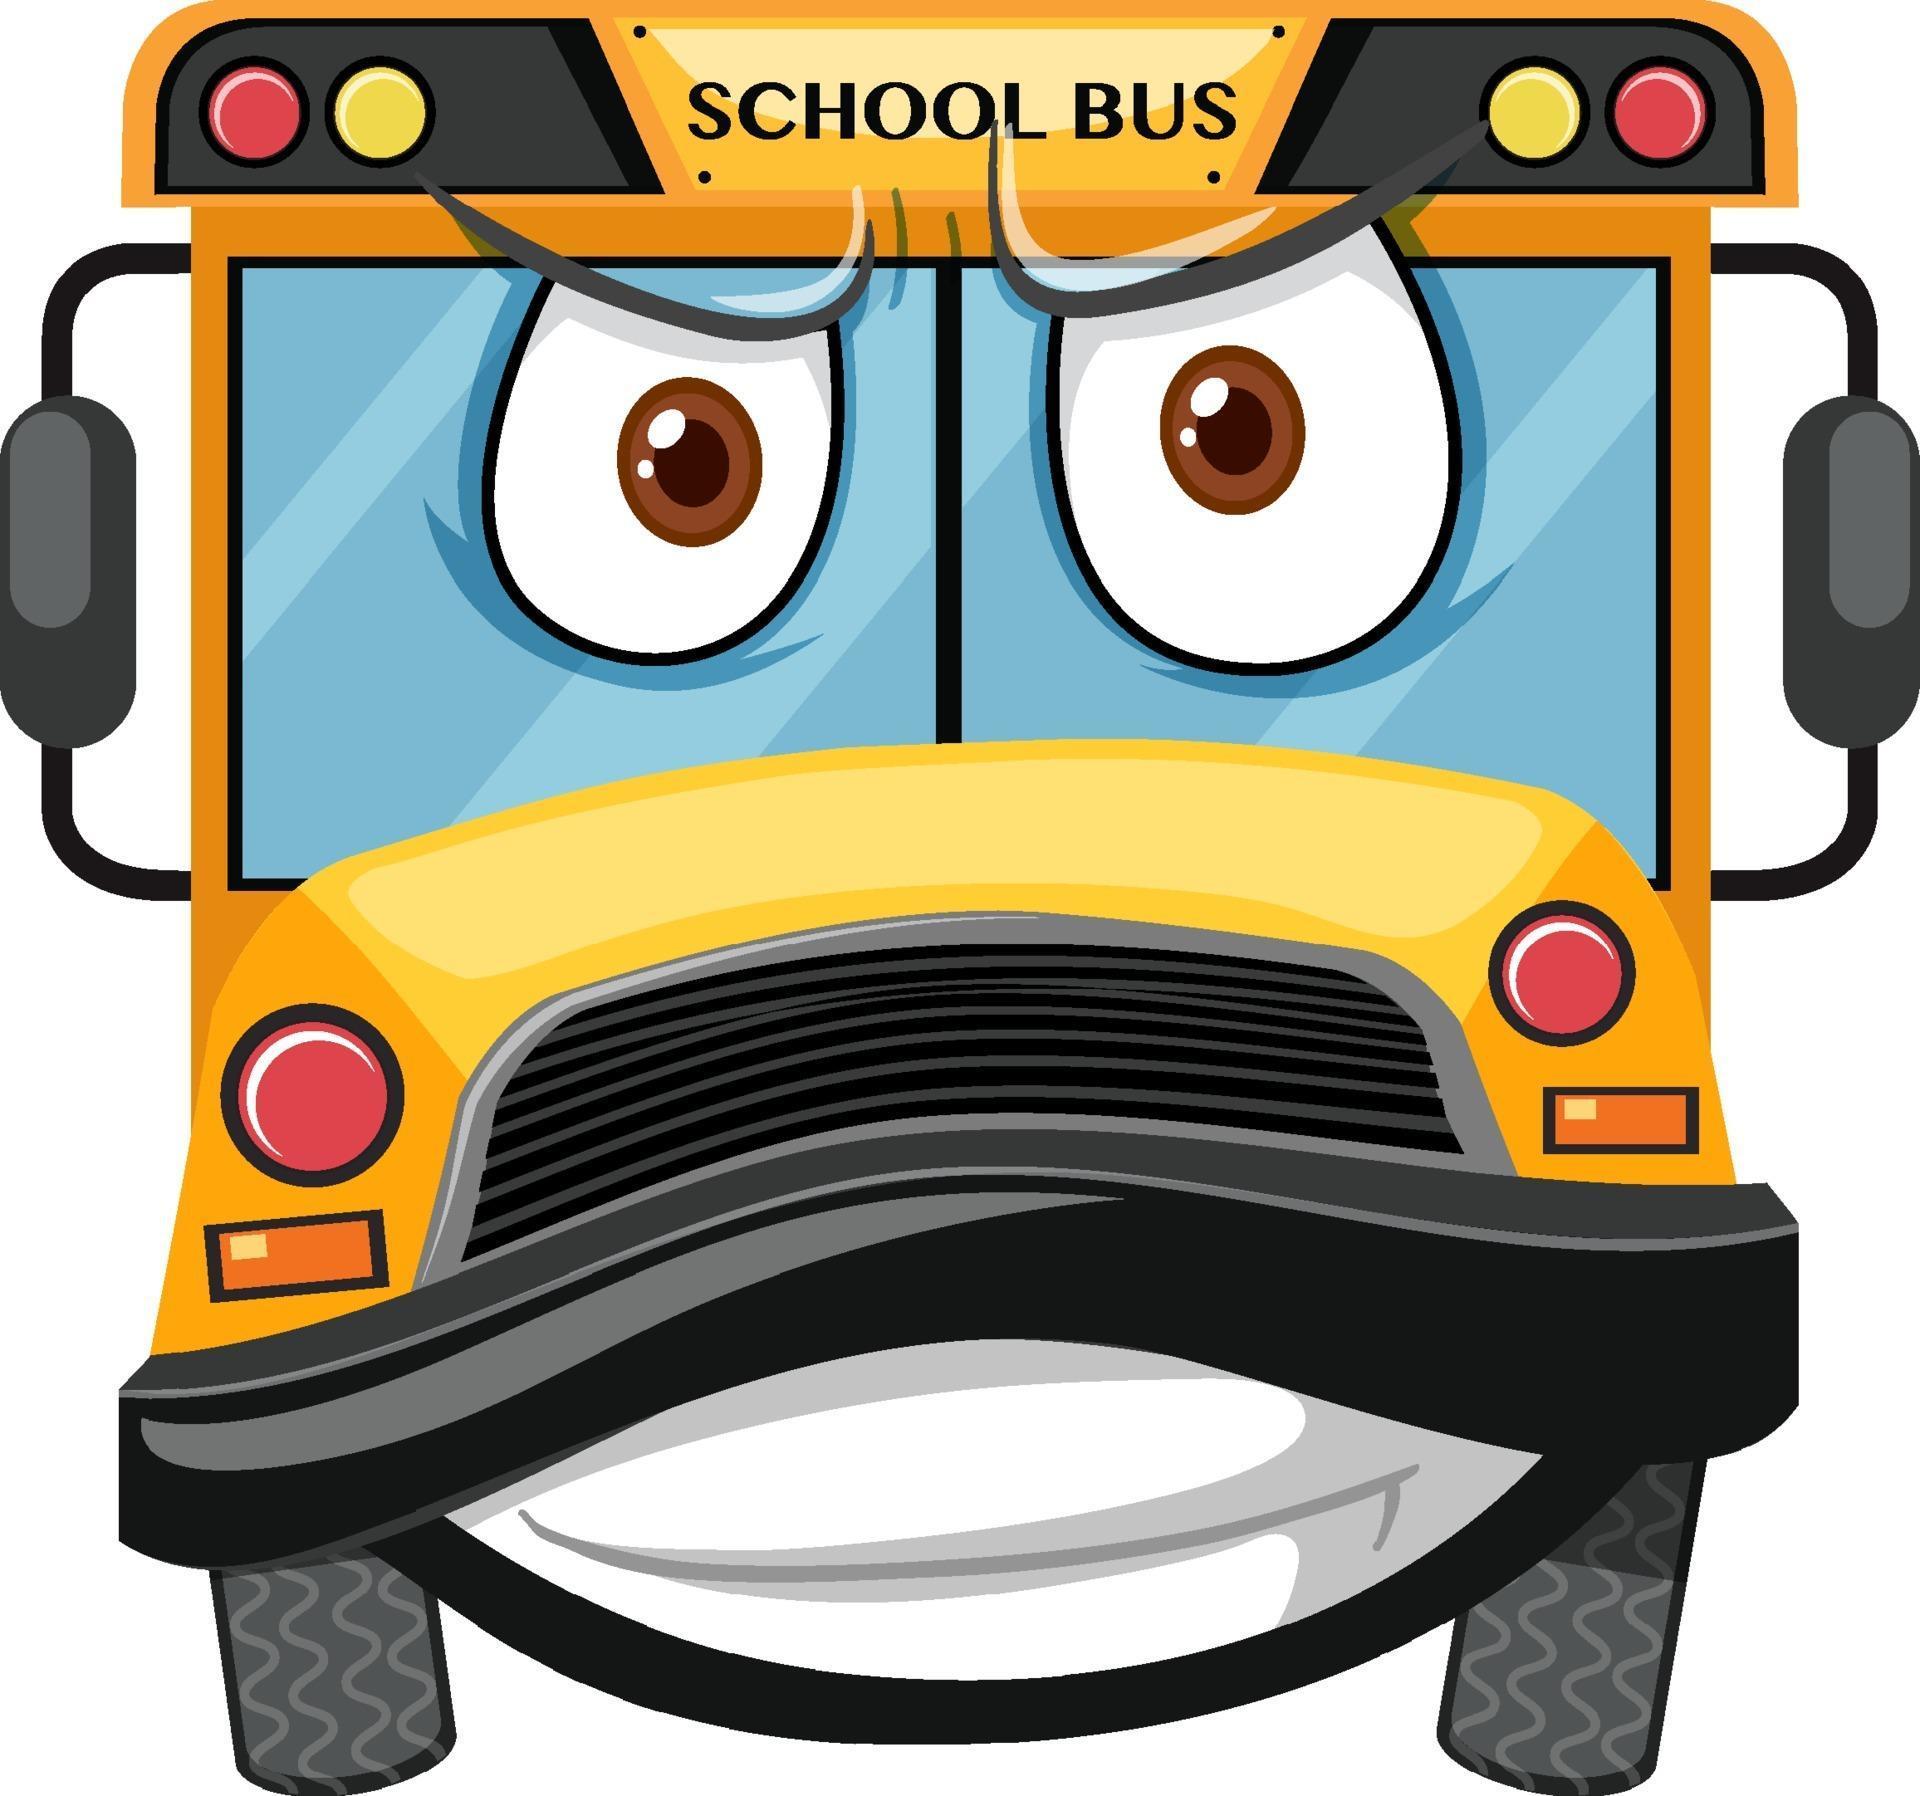 School bus cartoon character with angry face expression on white ...